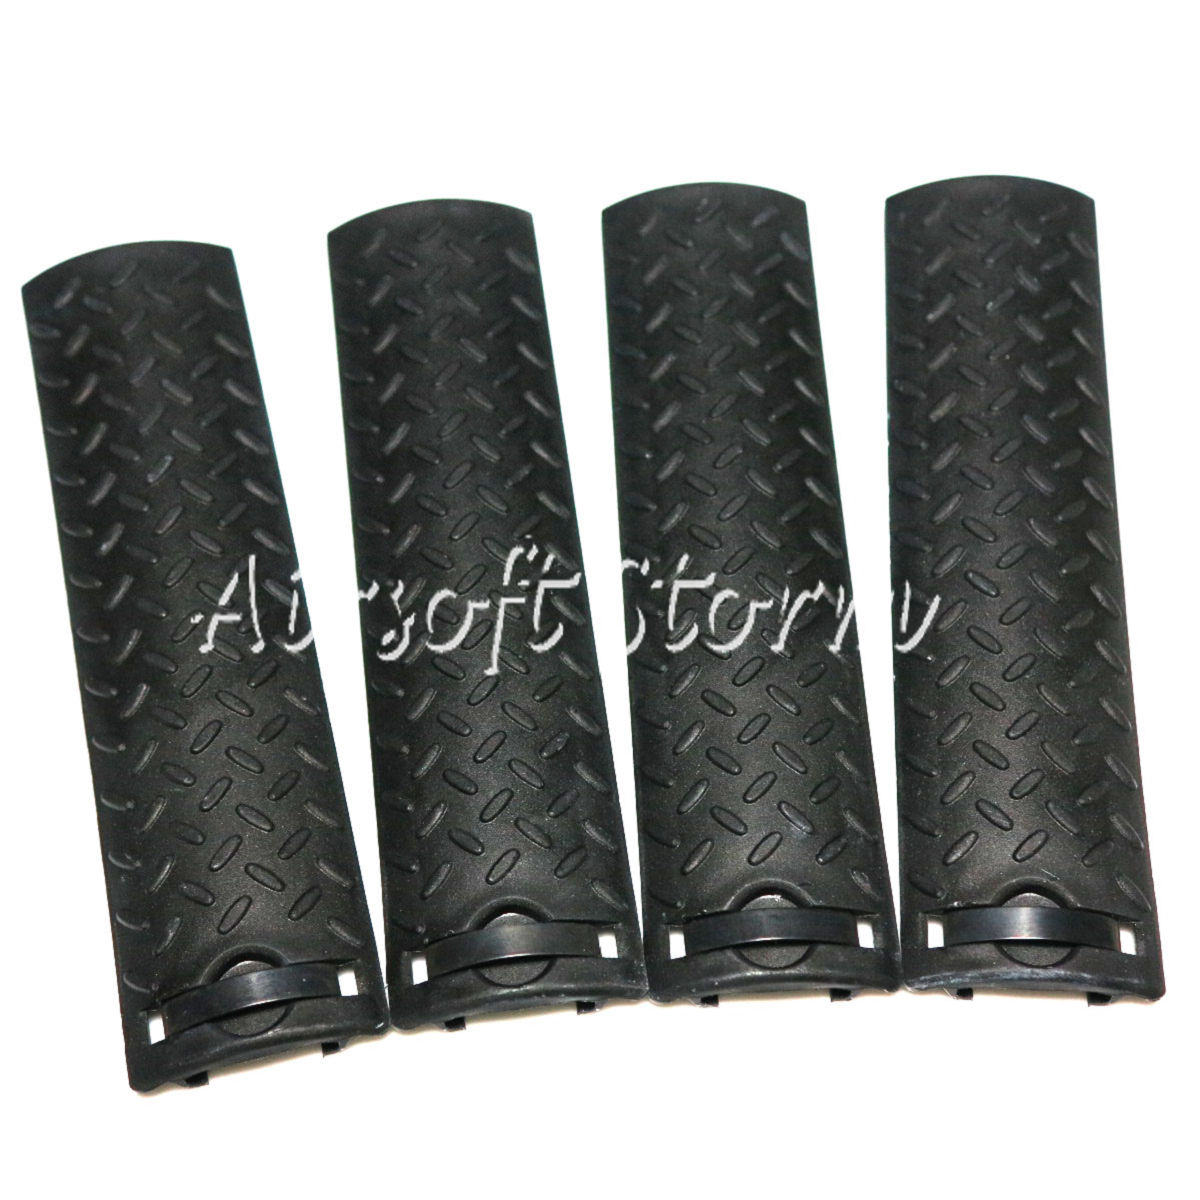 Shooting Tactical Gear 4pcs Set Energy Skidproof Texture Type Rail Cover Panel Black